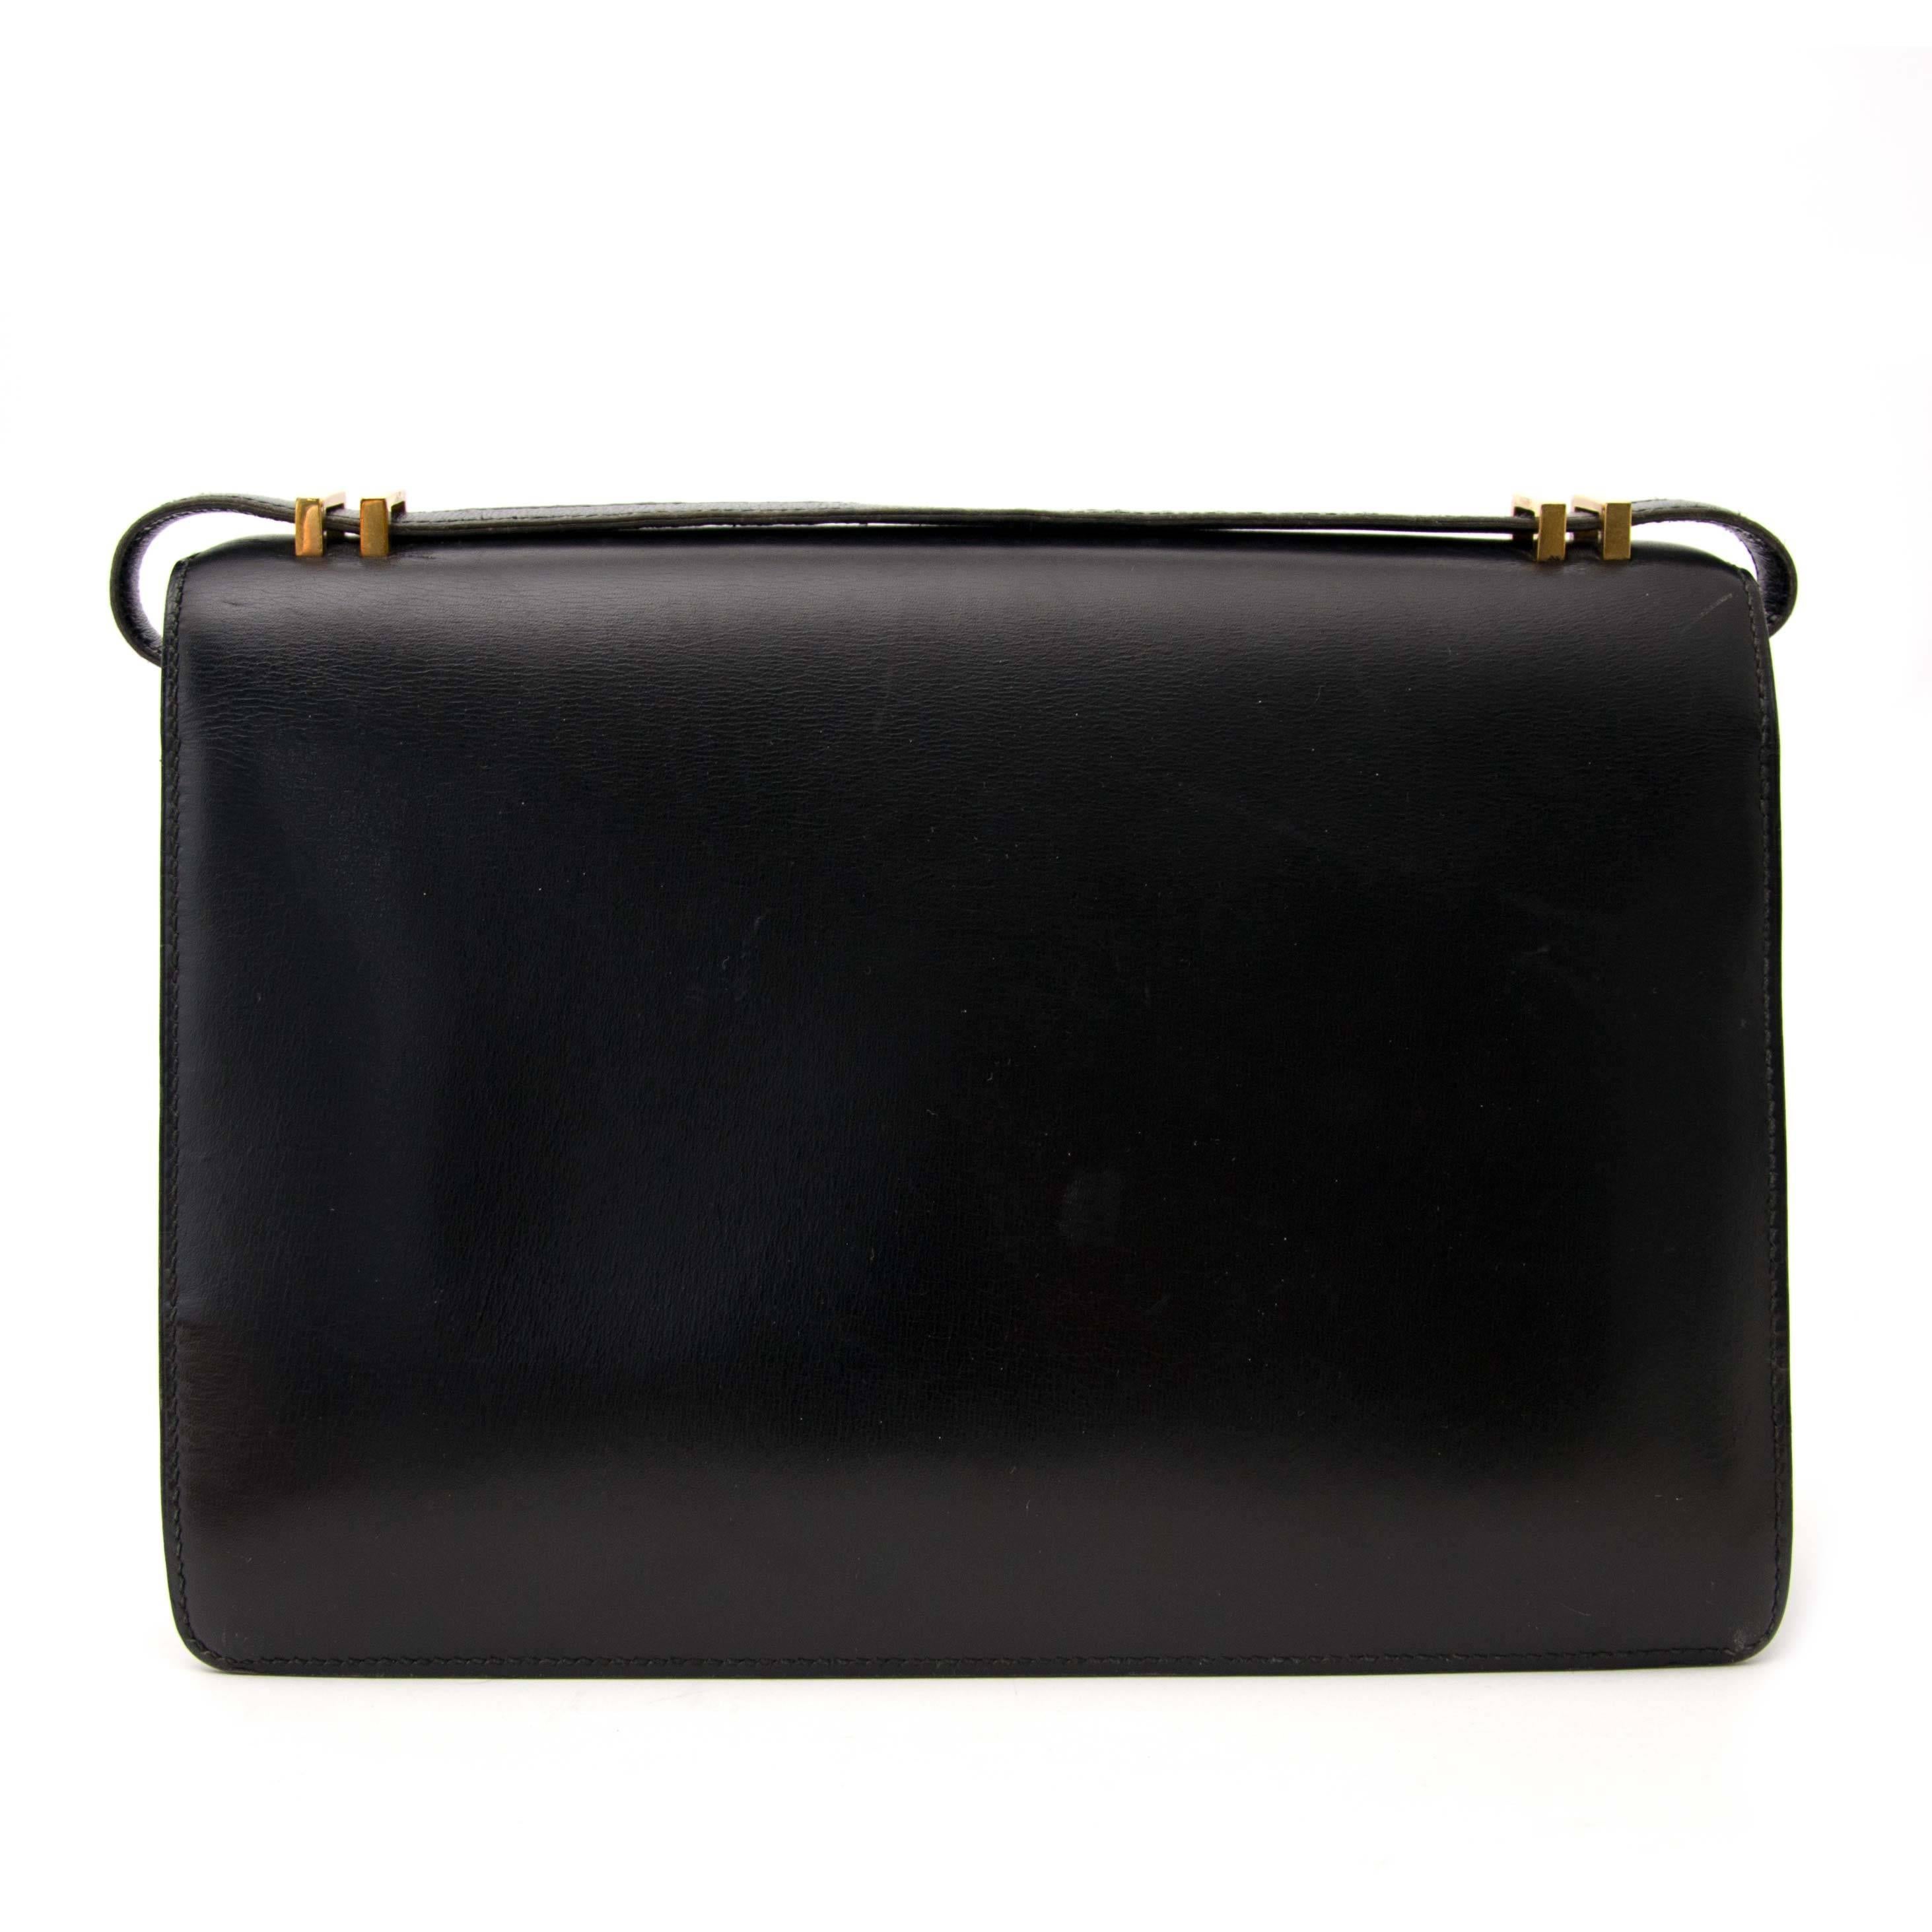 Good preloved condition.

Hermès Black Bag

Beautiful black Hermès bag with gold metal clasp.The interior has two large and one small compartment with side pockets.

This elegant beauty can be worn as clutch and shoulder bag.

This vintage classic